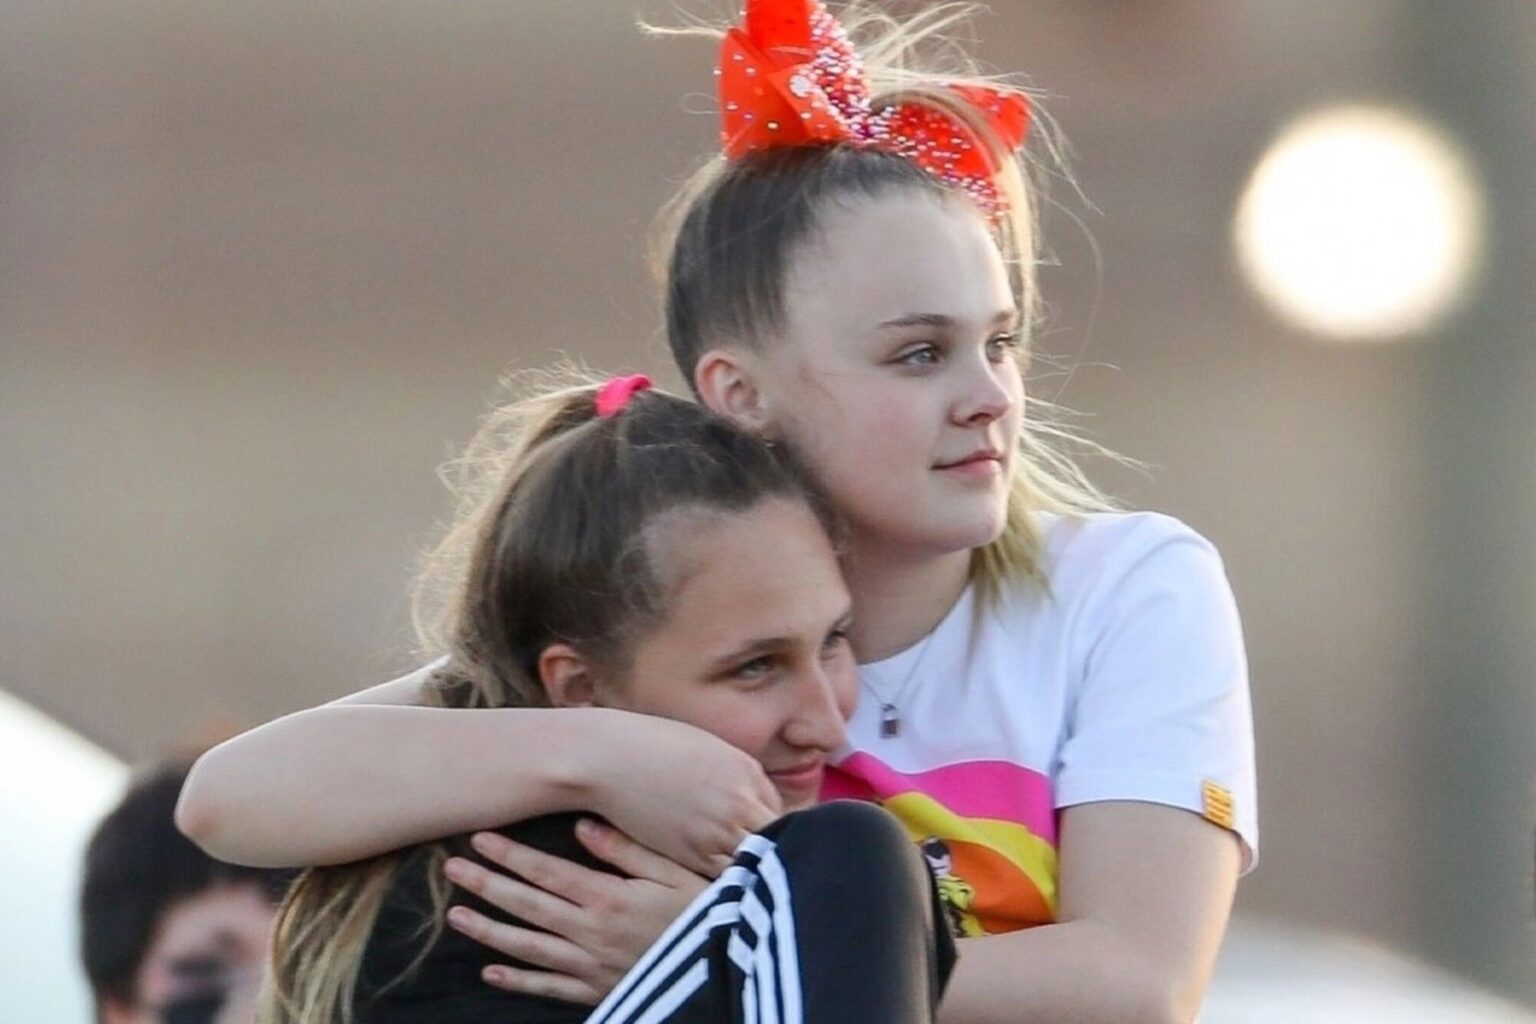 What is Jojo Siwa up to now that she's turned eighteen? Read all about her adorable relationship with Kylie Prew and how she's changing up her look here.